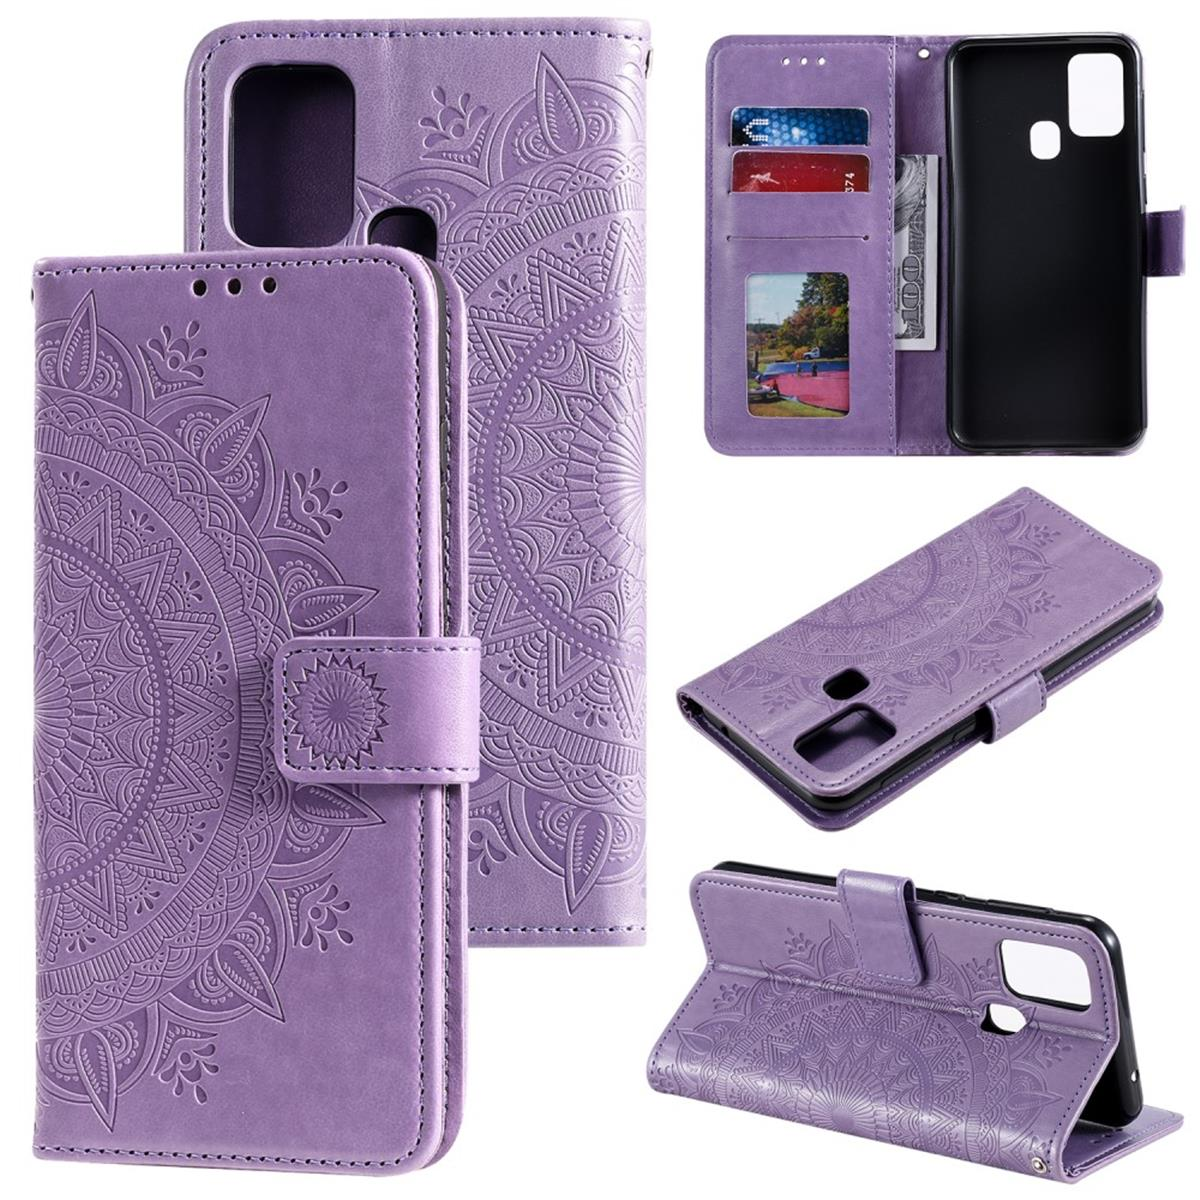 Y6p, Huawei, COVERKINGZ mit Lila Mandala Muster, Bookcover, Klapphülle